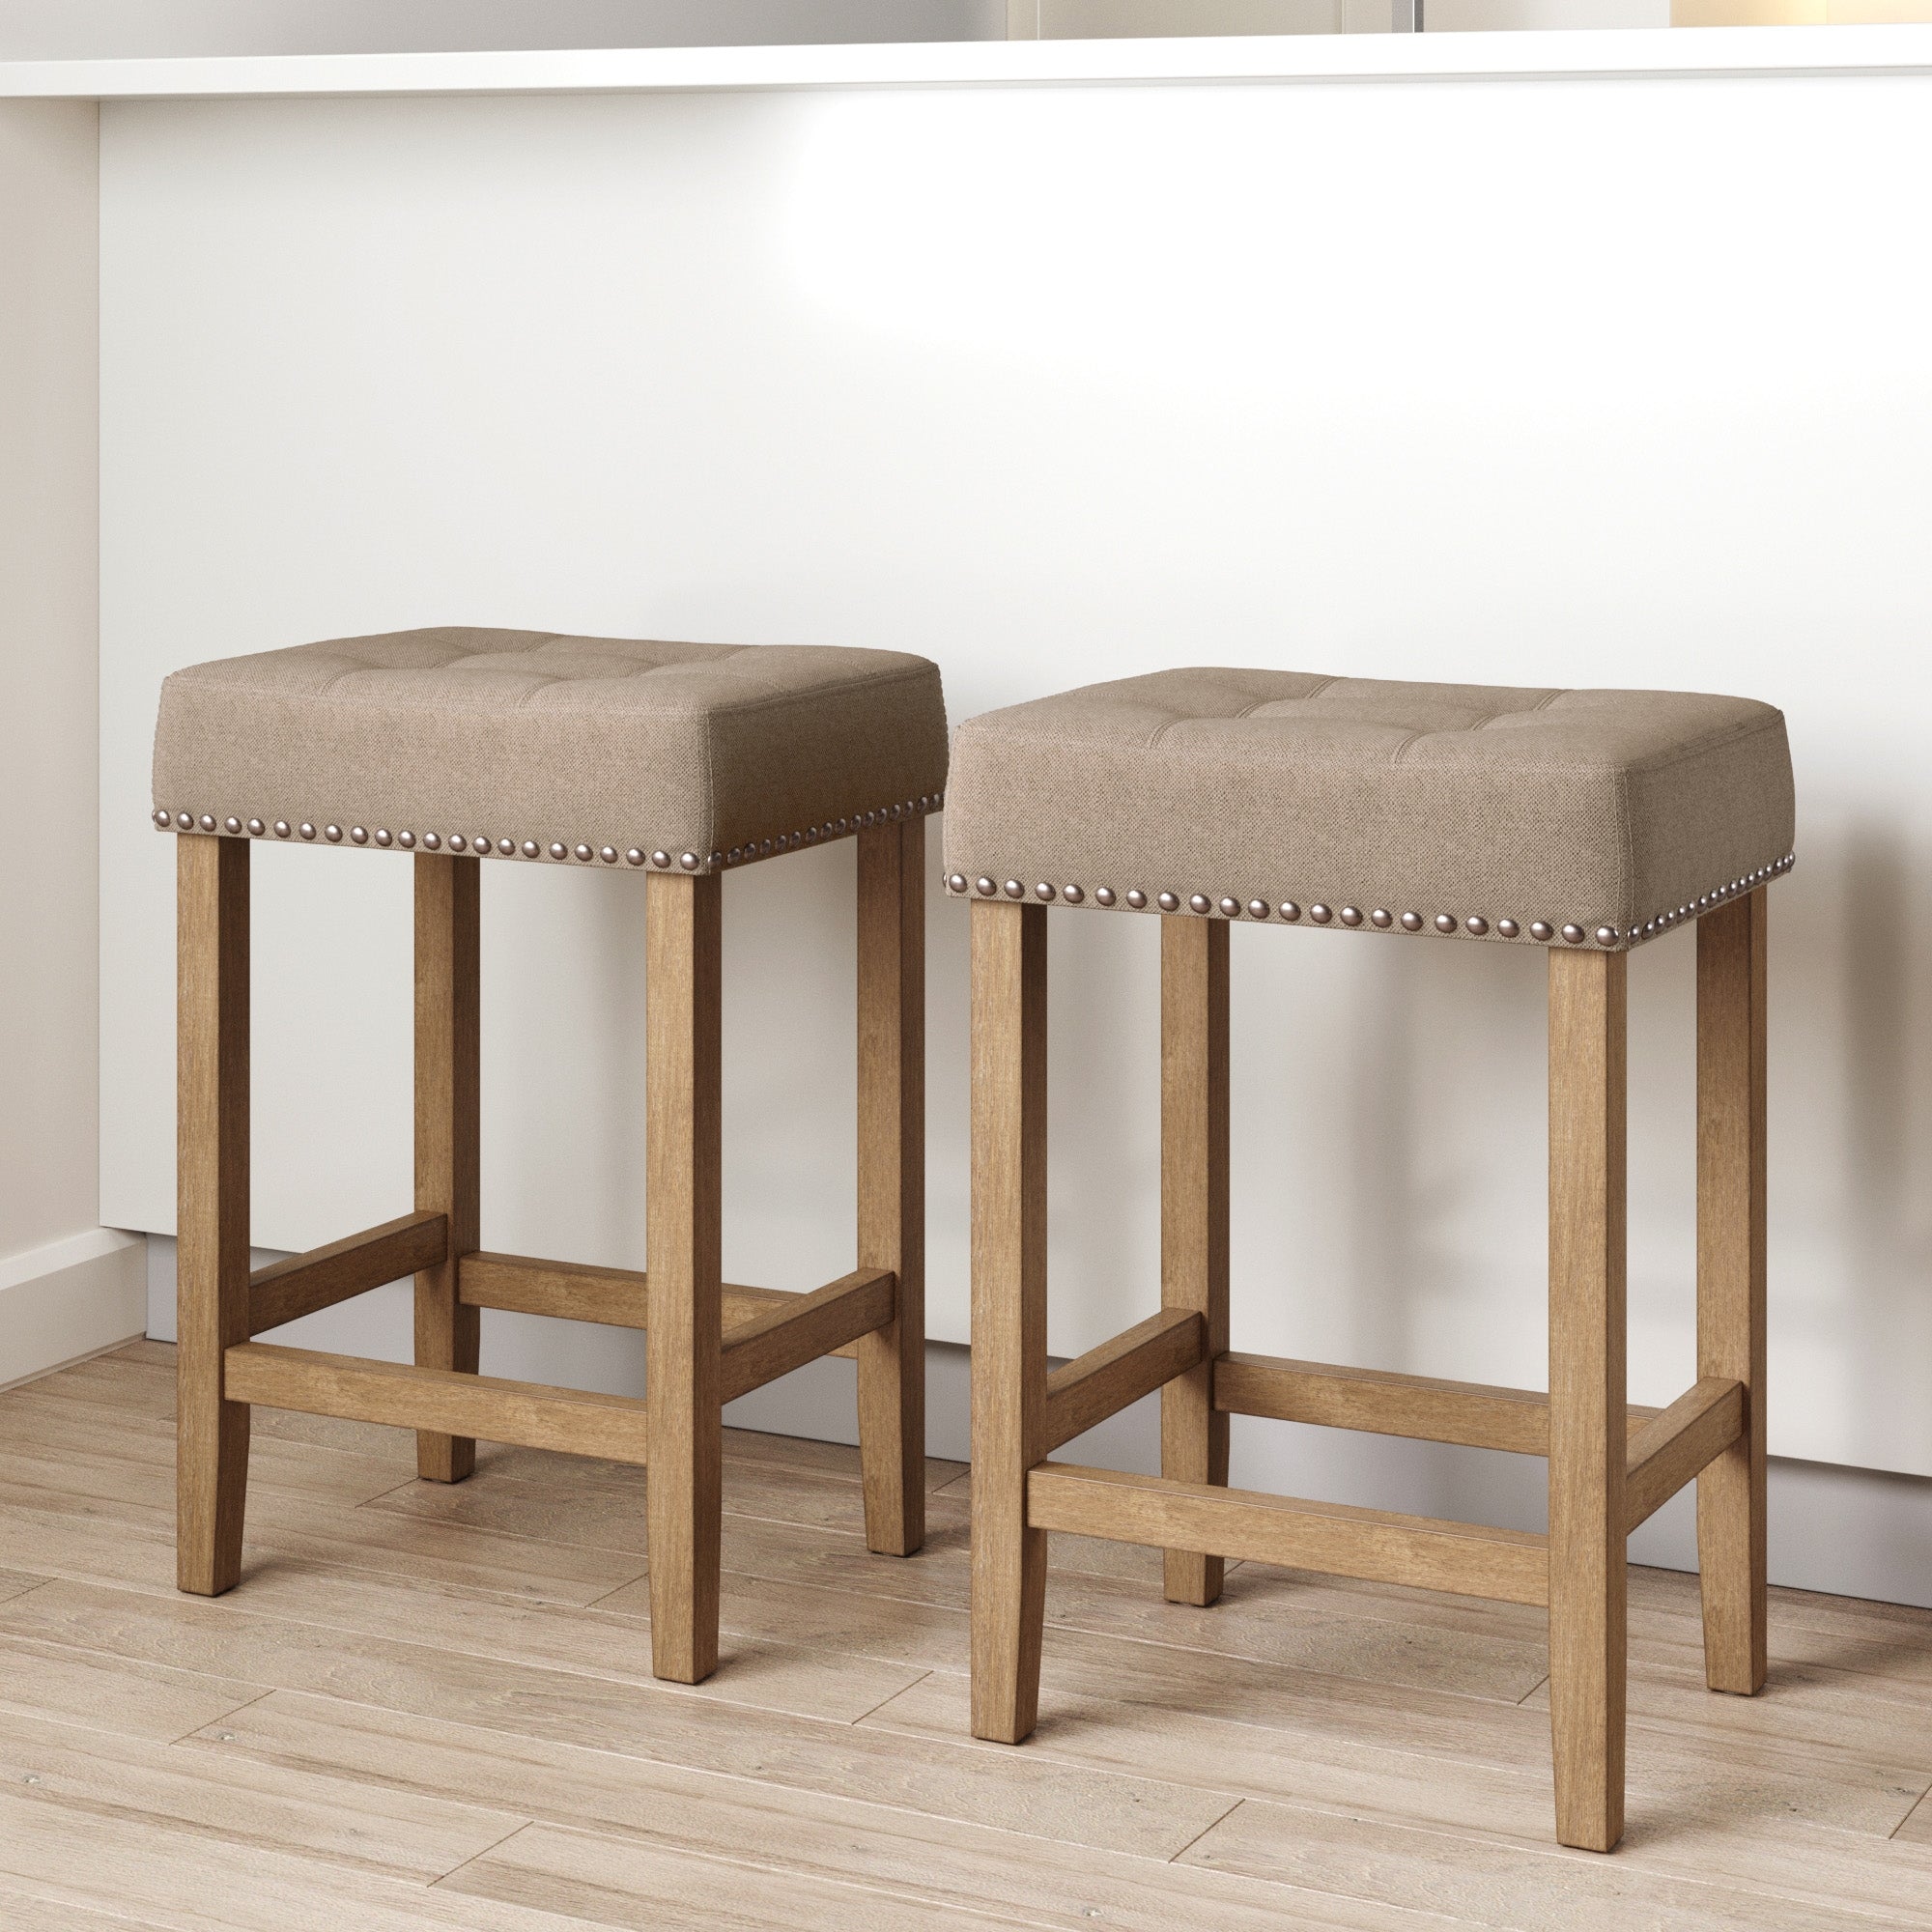 Set of 2 Tufted Wood Bar Stools Brown Flax